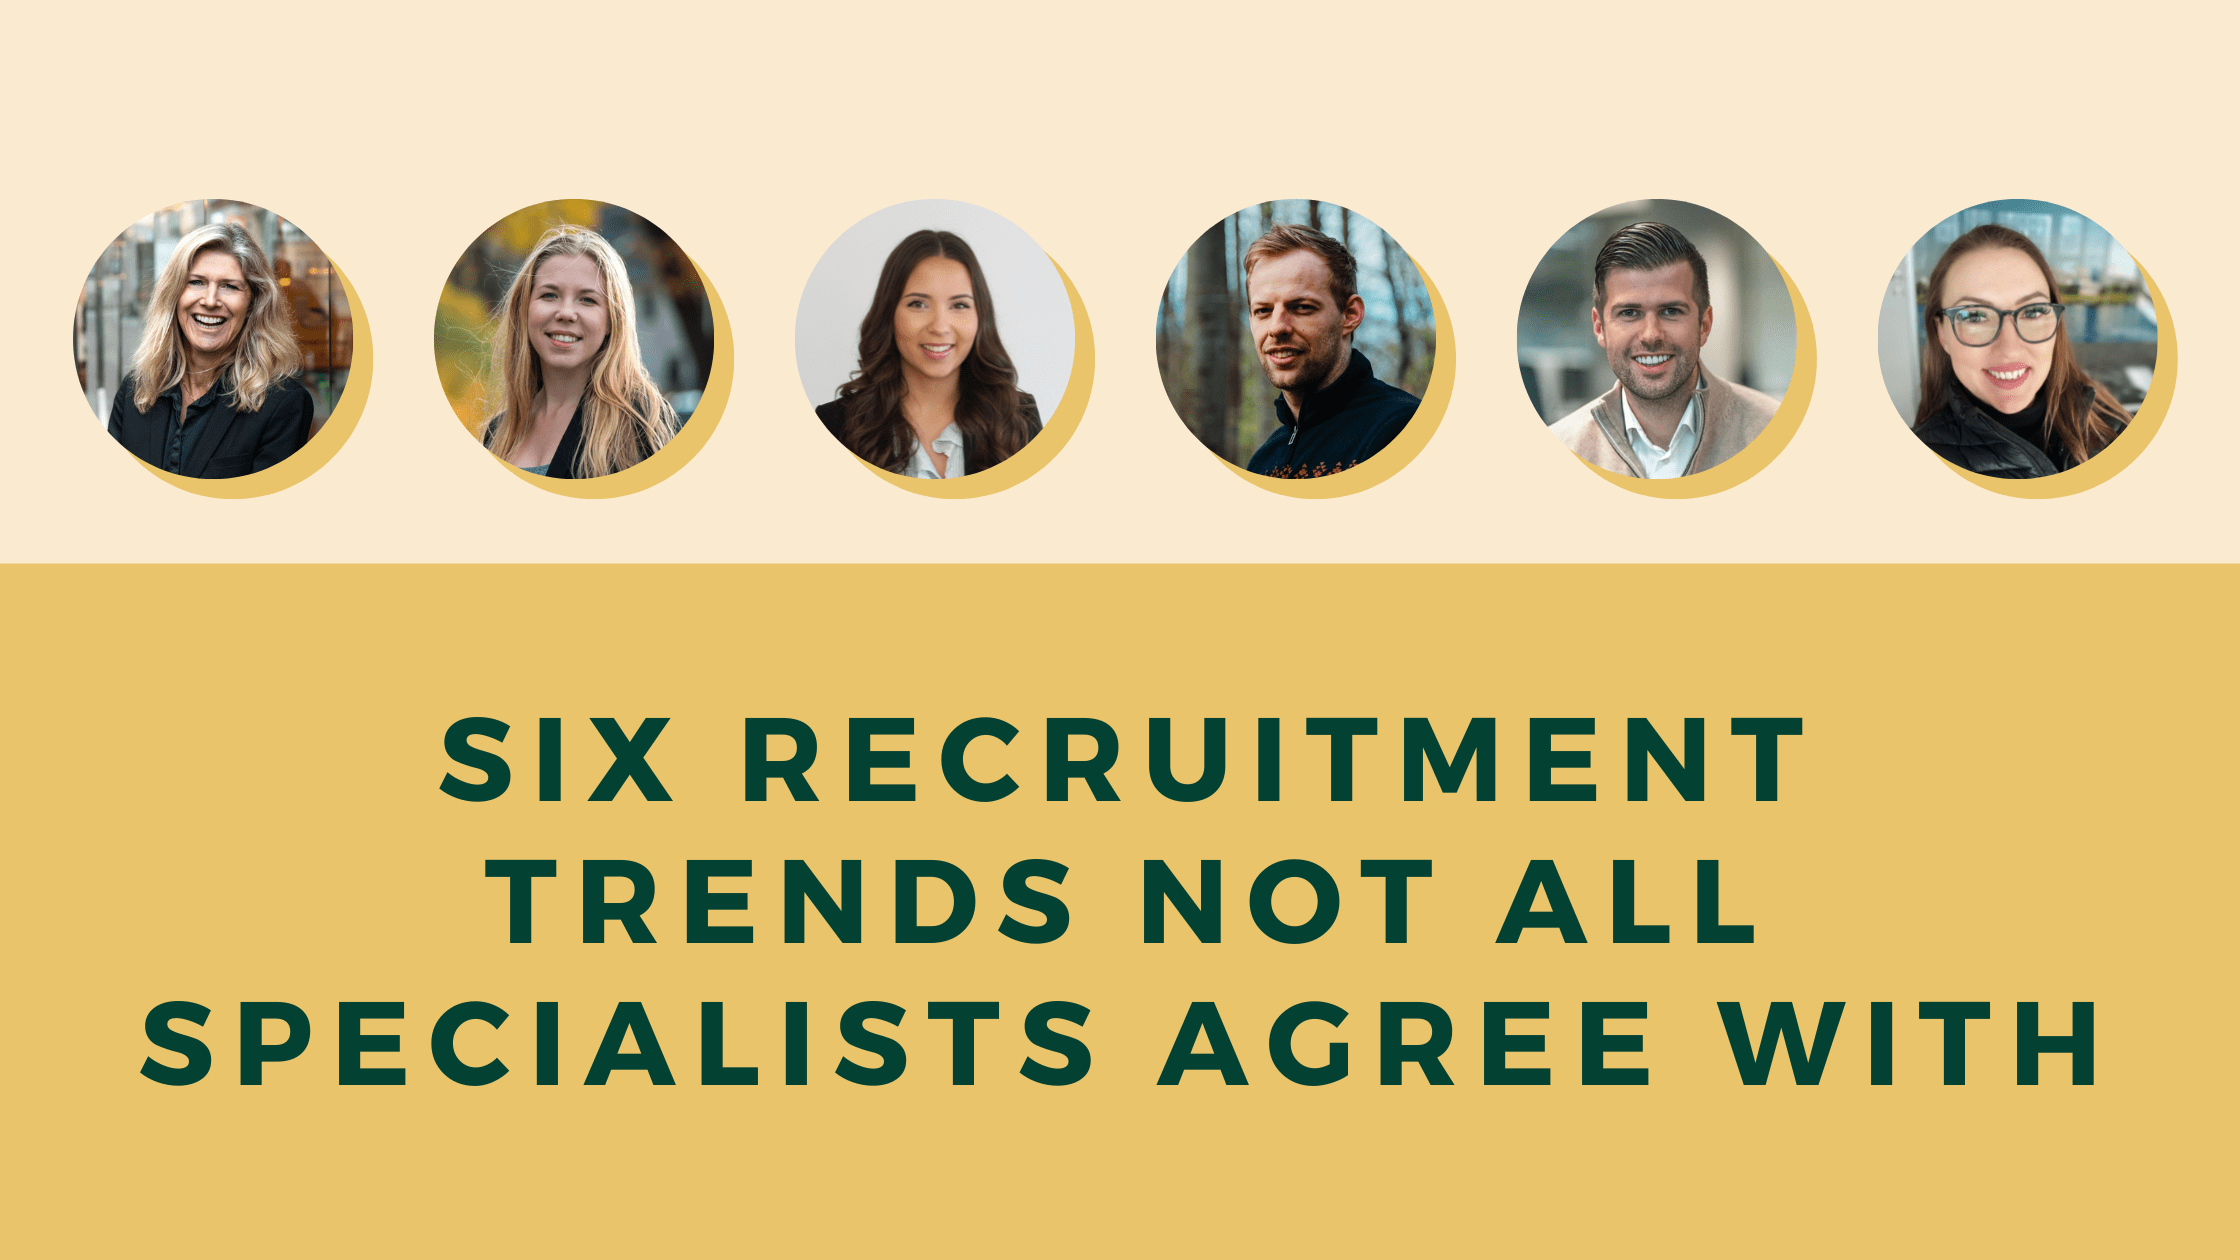 Six recruitment trends not all specialists agree with